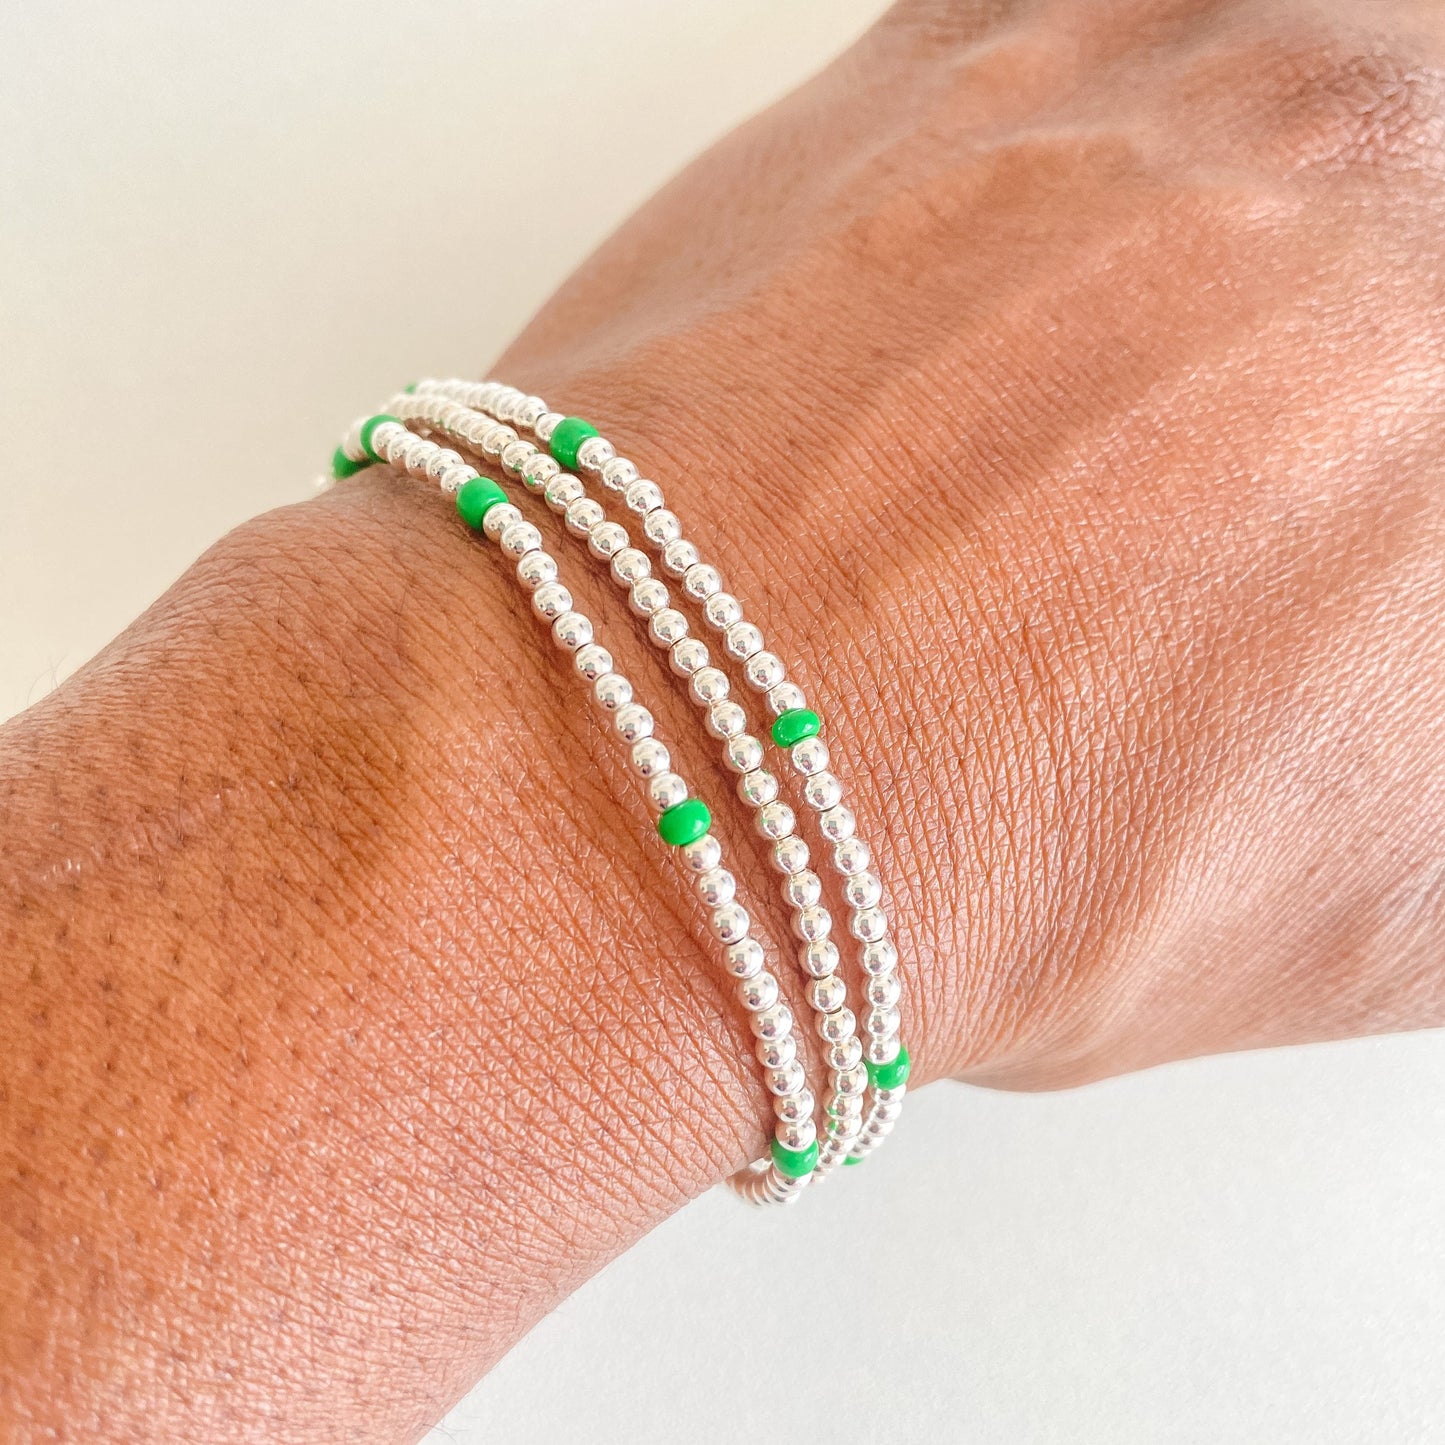 3 sterling silver and green beaded bracelet stack 